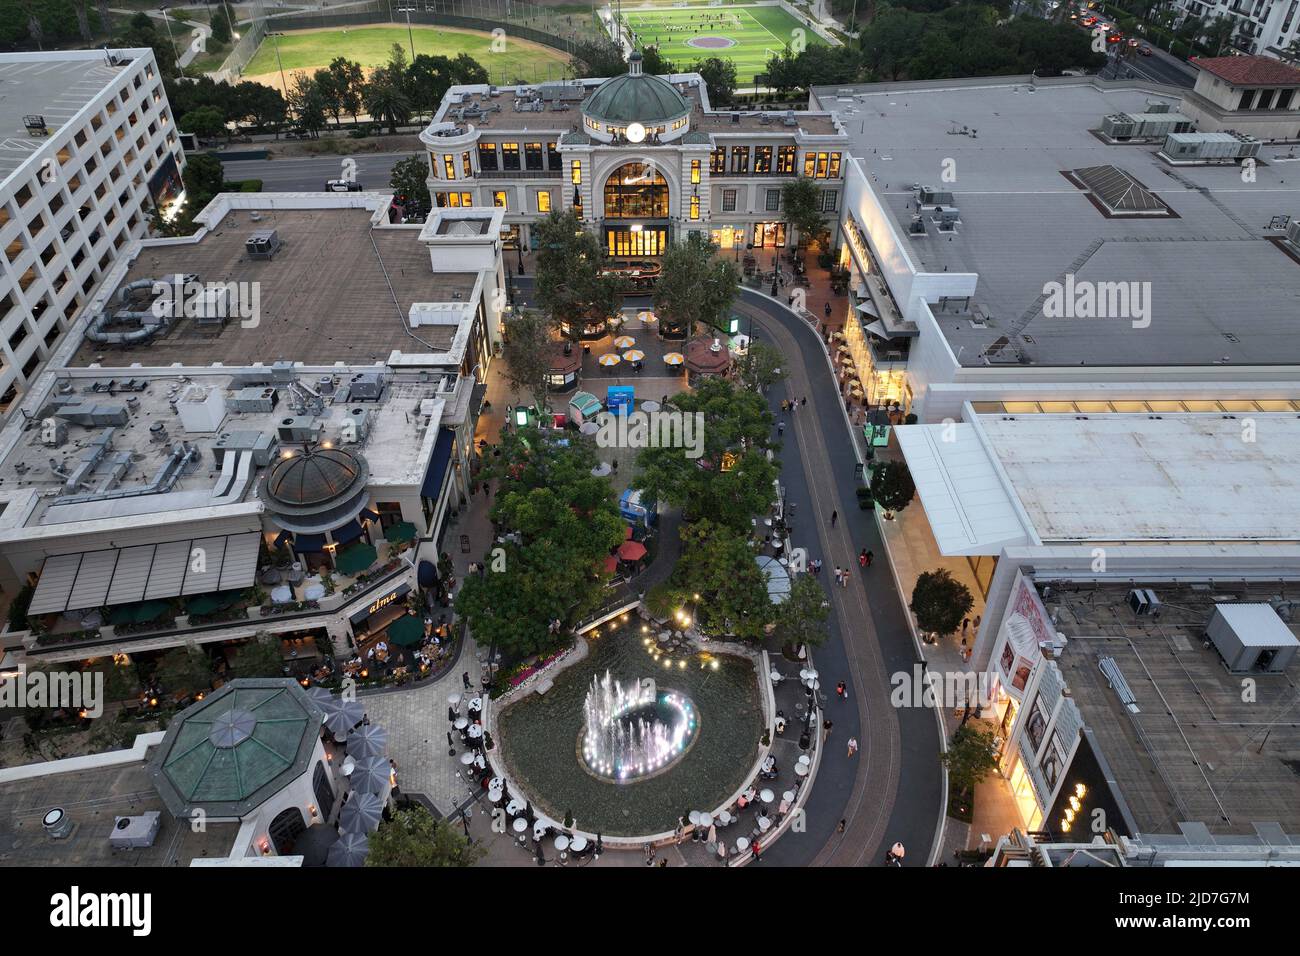 Los Angeles, United States. 18th June, 2022. A general overall aerial view  of the Nike store at The Grove shopping center, Wednesday, May 25, 2022, in  Los Angeles. Photo via Credit: Newscom/Alamy